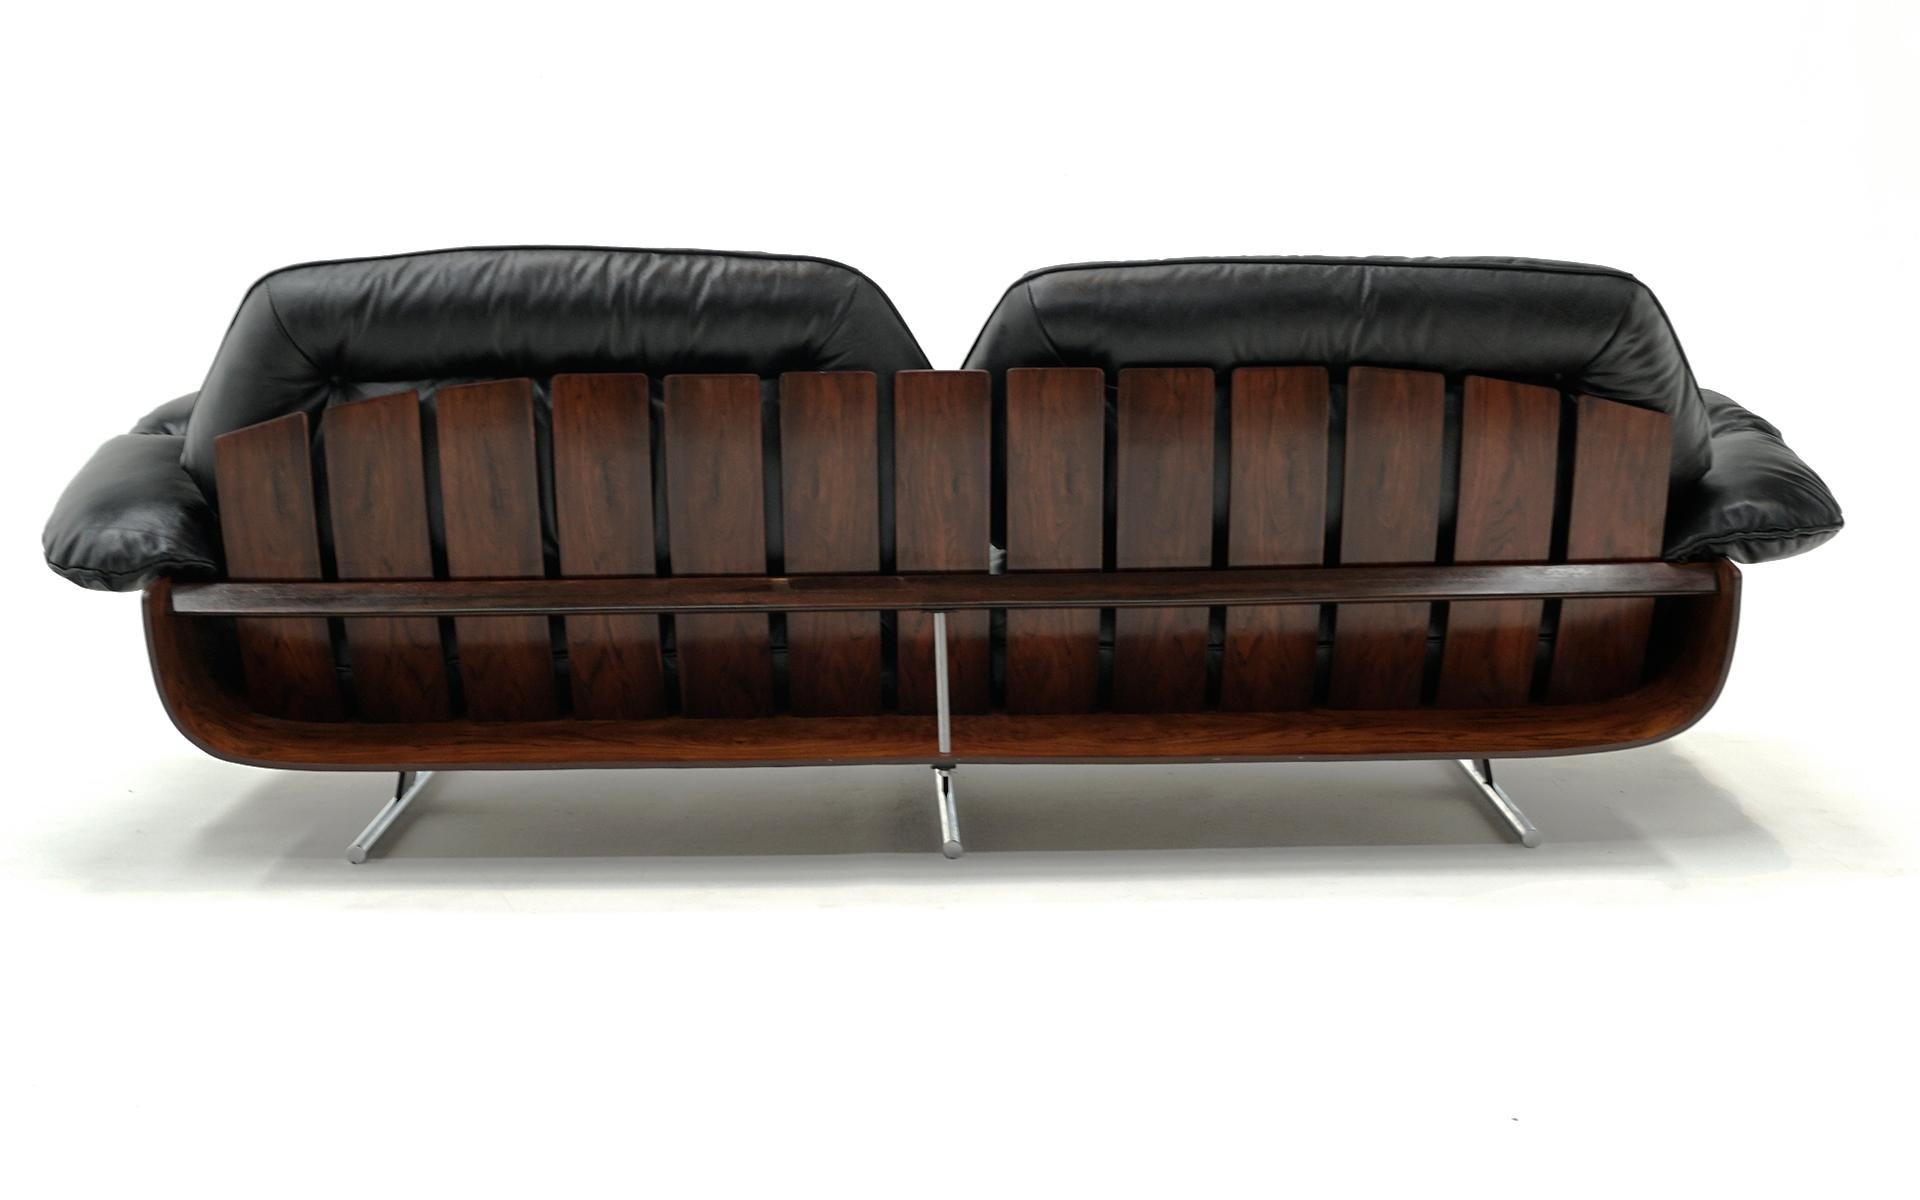 Steel Jorge Zalszupin Sofa in Black Leather and Brazilian Rosewood. Great Condition. For Sale